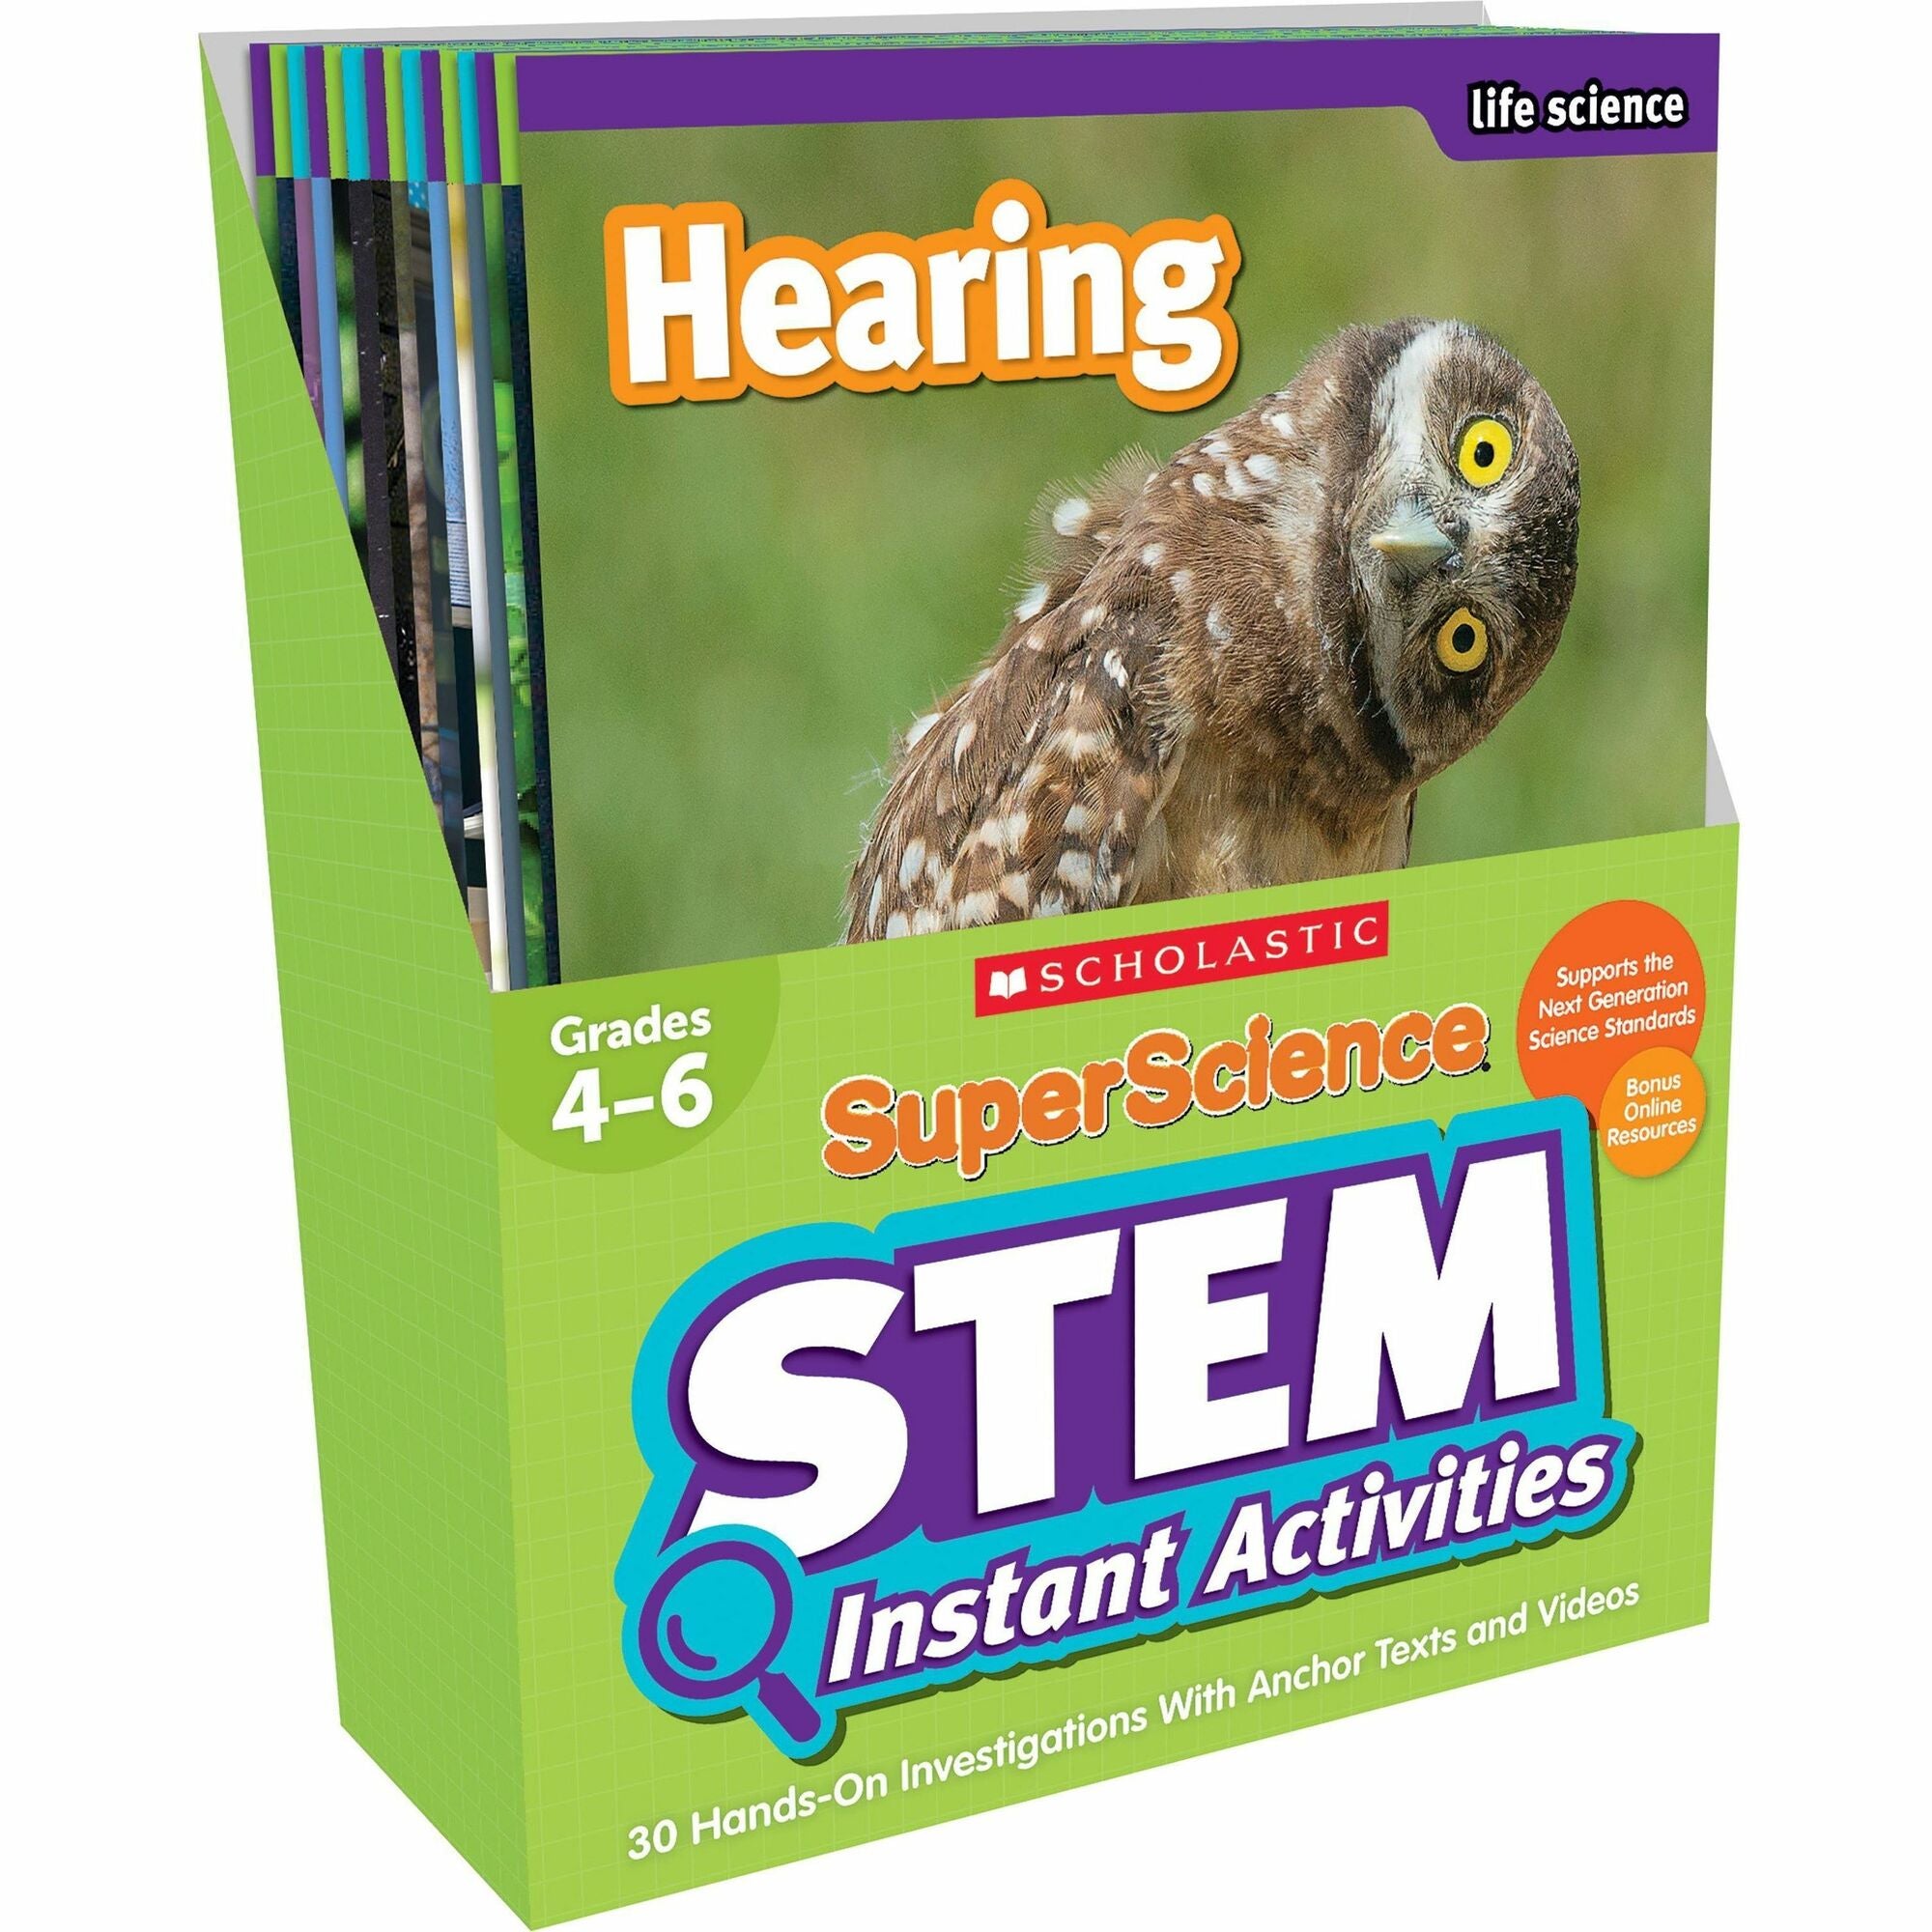 scholastic-superscience-stem-instant-activities-printed-book-grade-4-6_shs1338099019 - 1